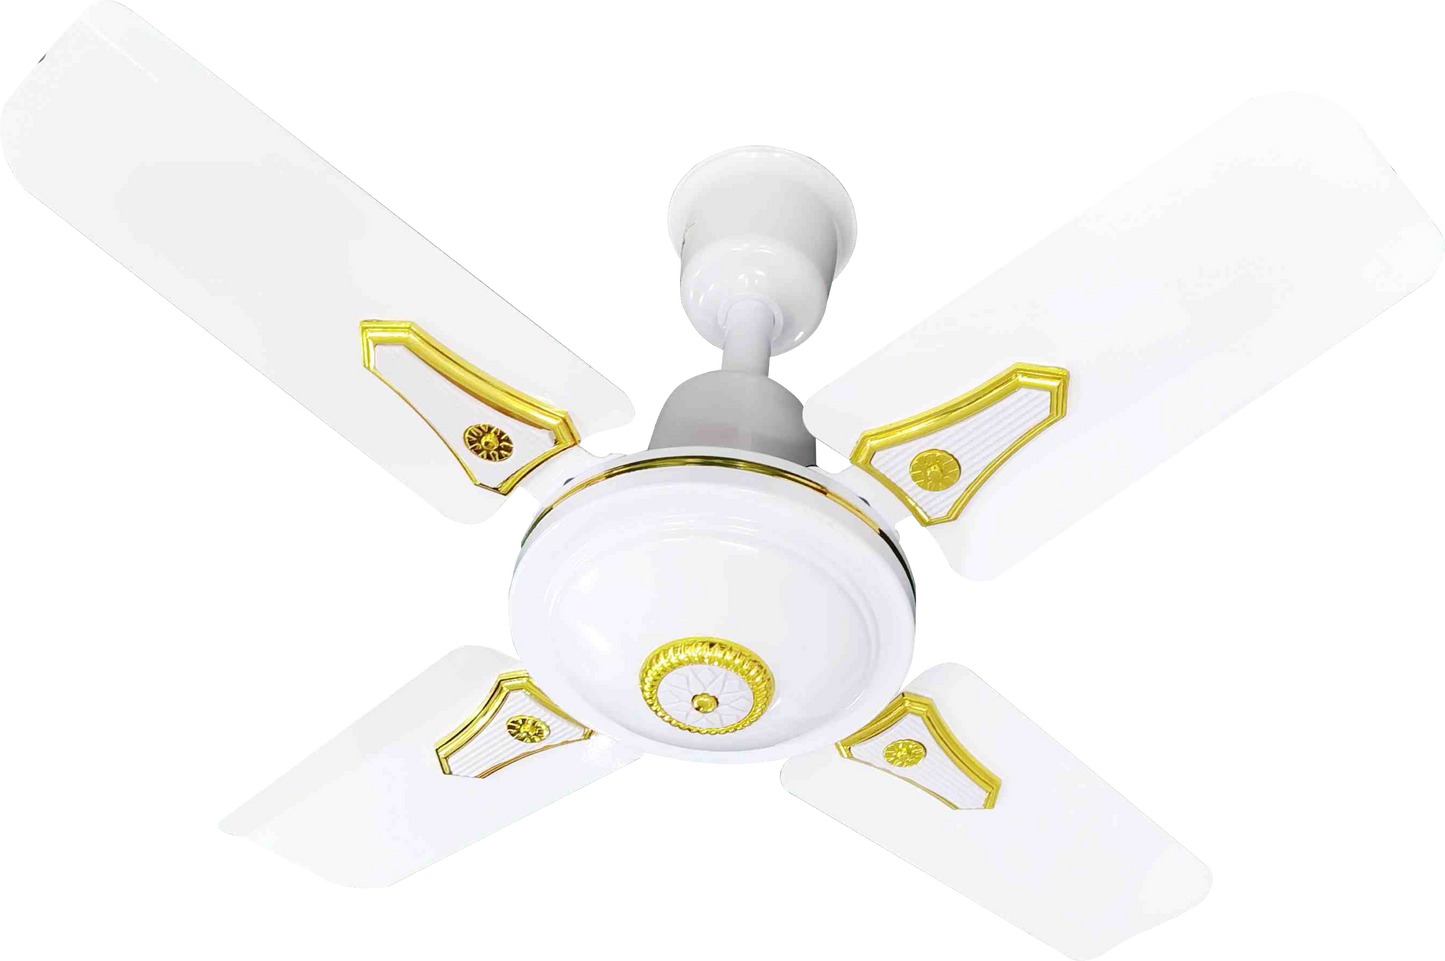 COSTA C2422D Ceiling Fan With 4 Metal Blade High Quality Fan